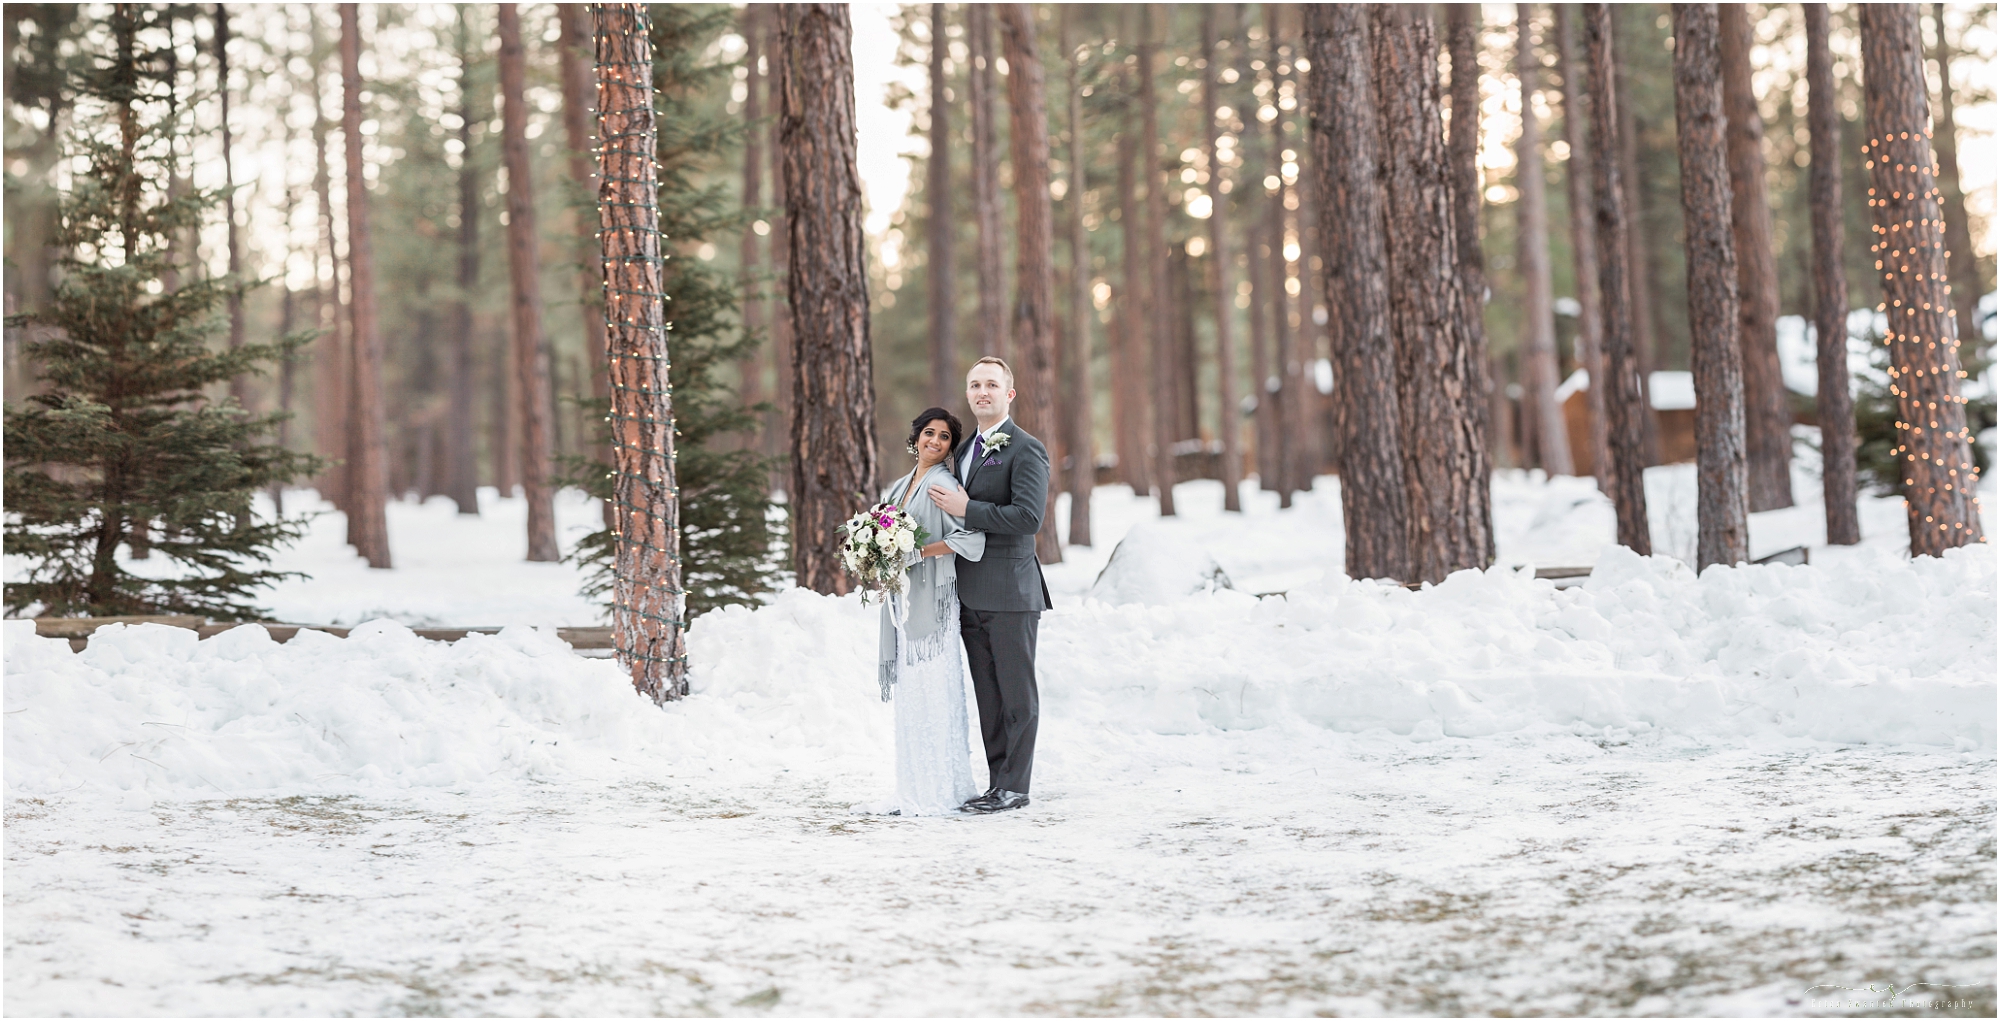 A stunning bride and groom portrait at Five Pine Lodge at this Sisters Oregon winter wedding.